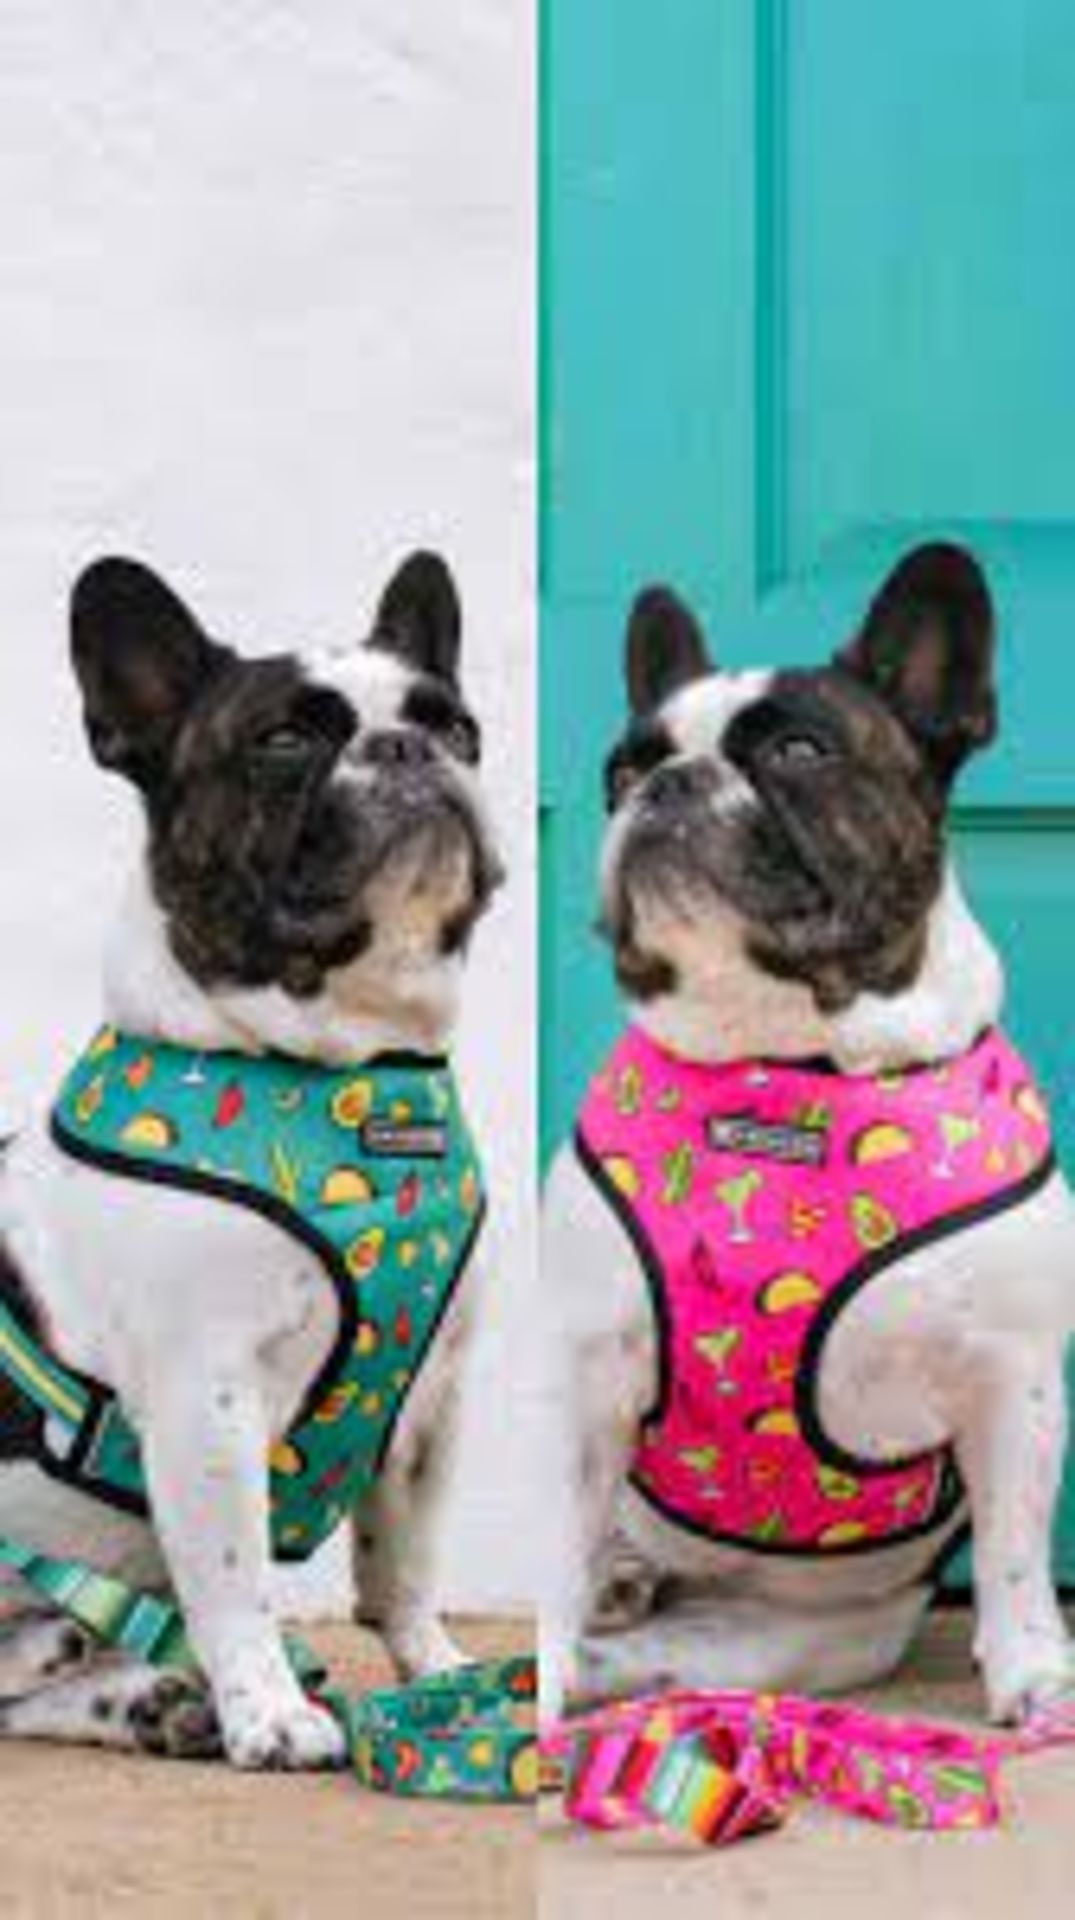 Trade Lot 100 X New & Packaged Frenchie The Bulldog Luxury Branded Dog Products. May include items